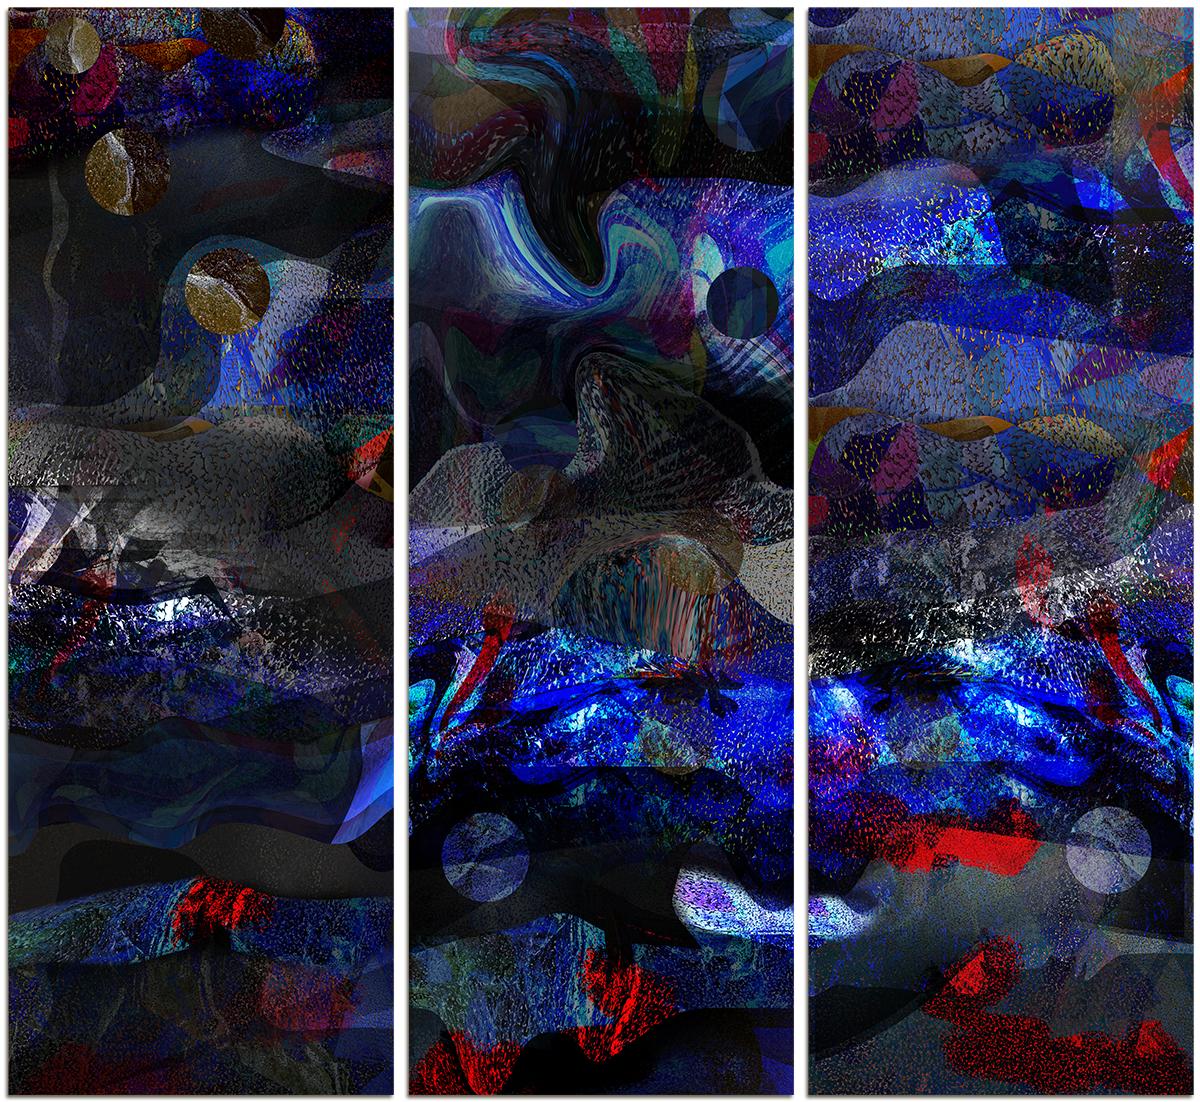 Marvin Berk Abstract Print - "Cosmic Explorations #2" - Abstract vertical photomontage in cool colors.